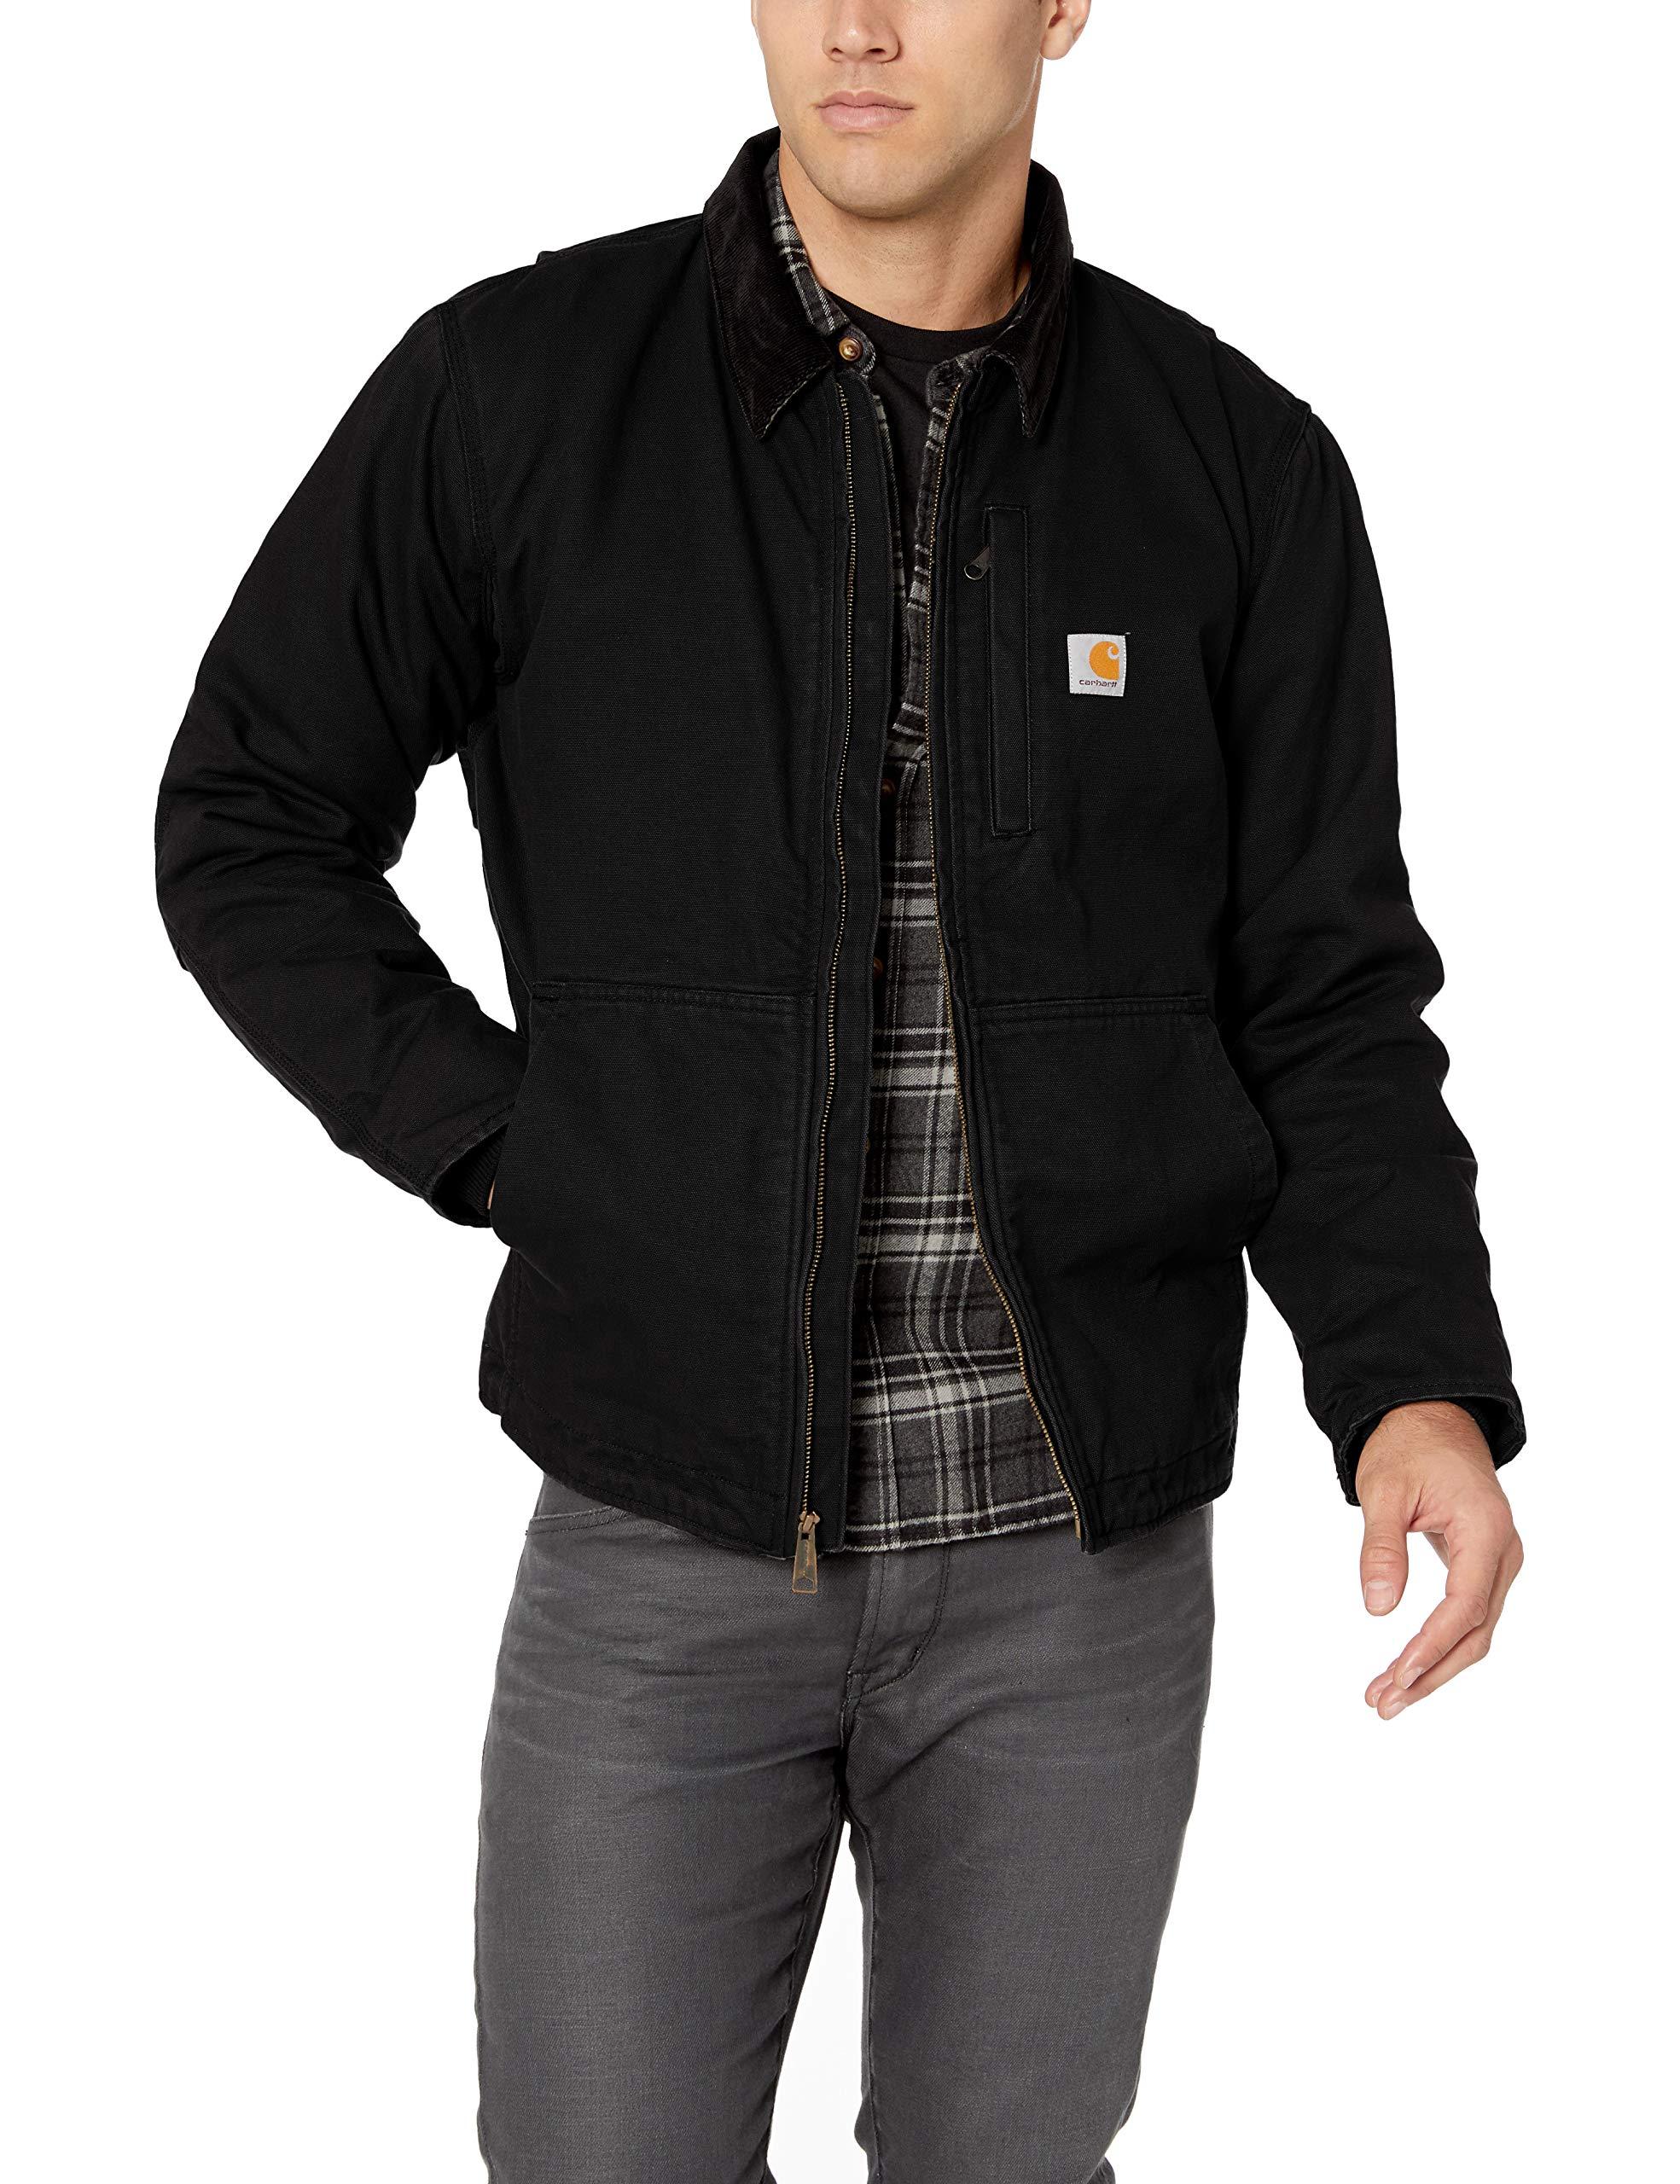 Carhartt Cotton Full Swing Armstrong Jacket in Black for Men - Lyst